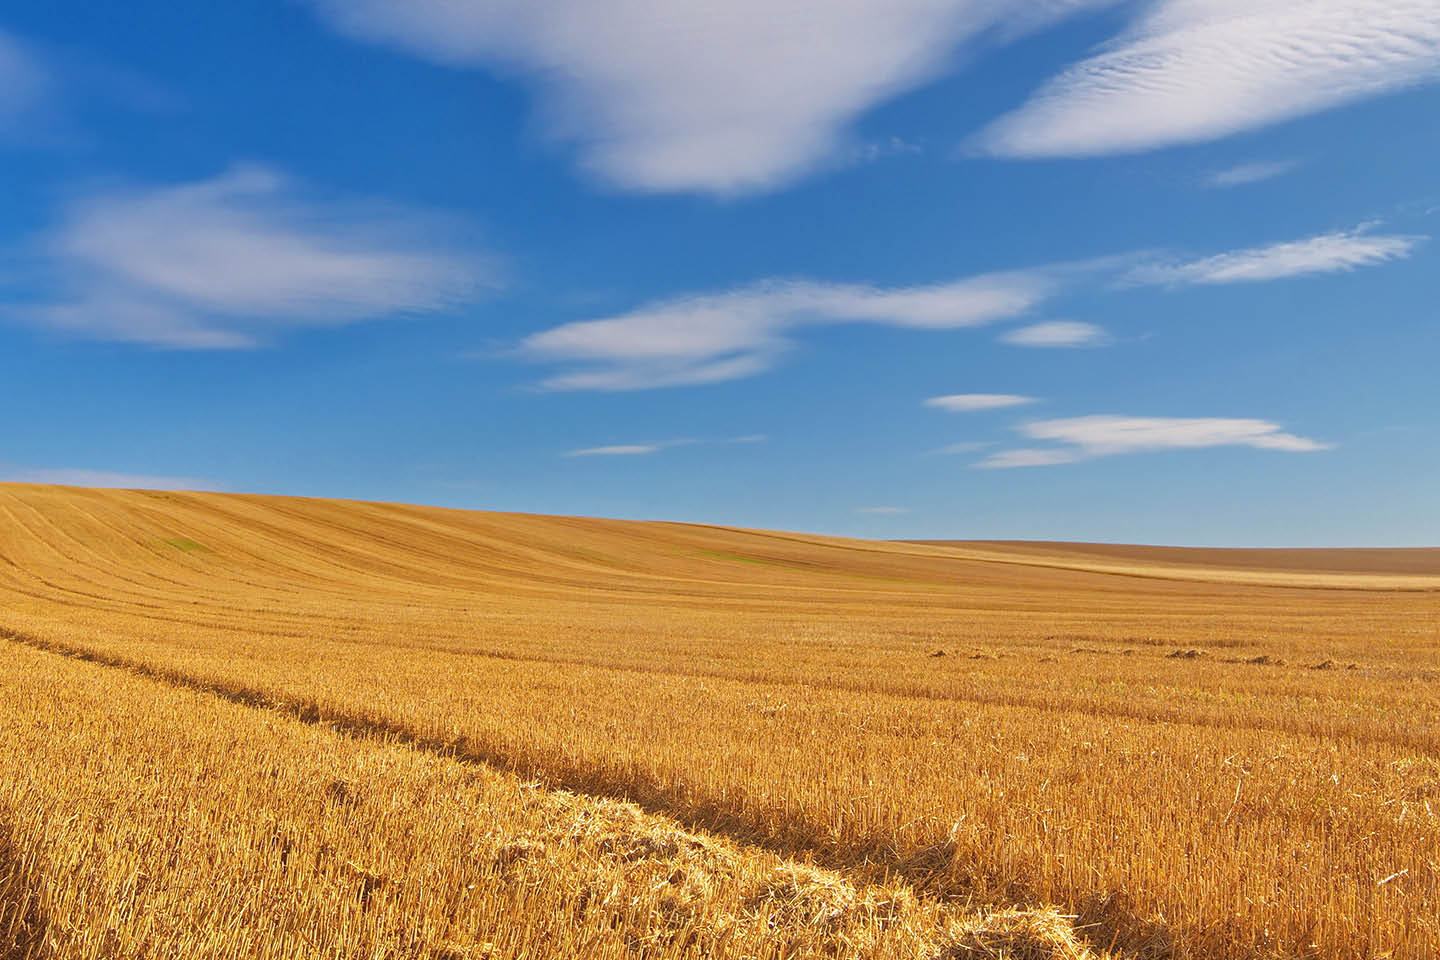 A_WEB_Card 1_1440x1200_cereals-harvested-clouds.jpg